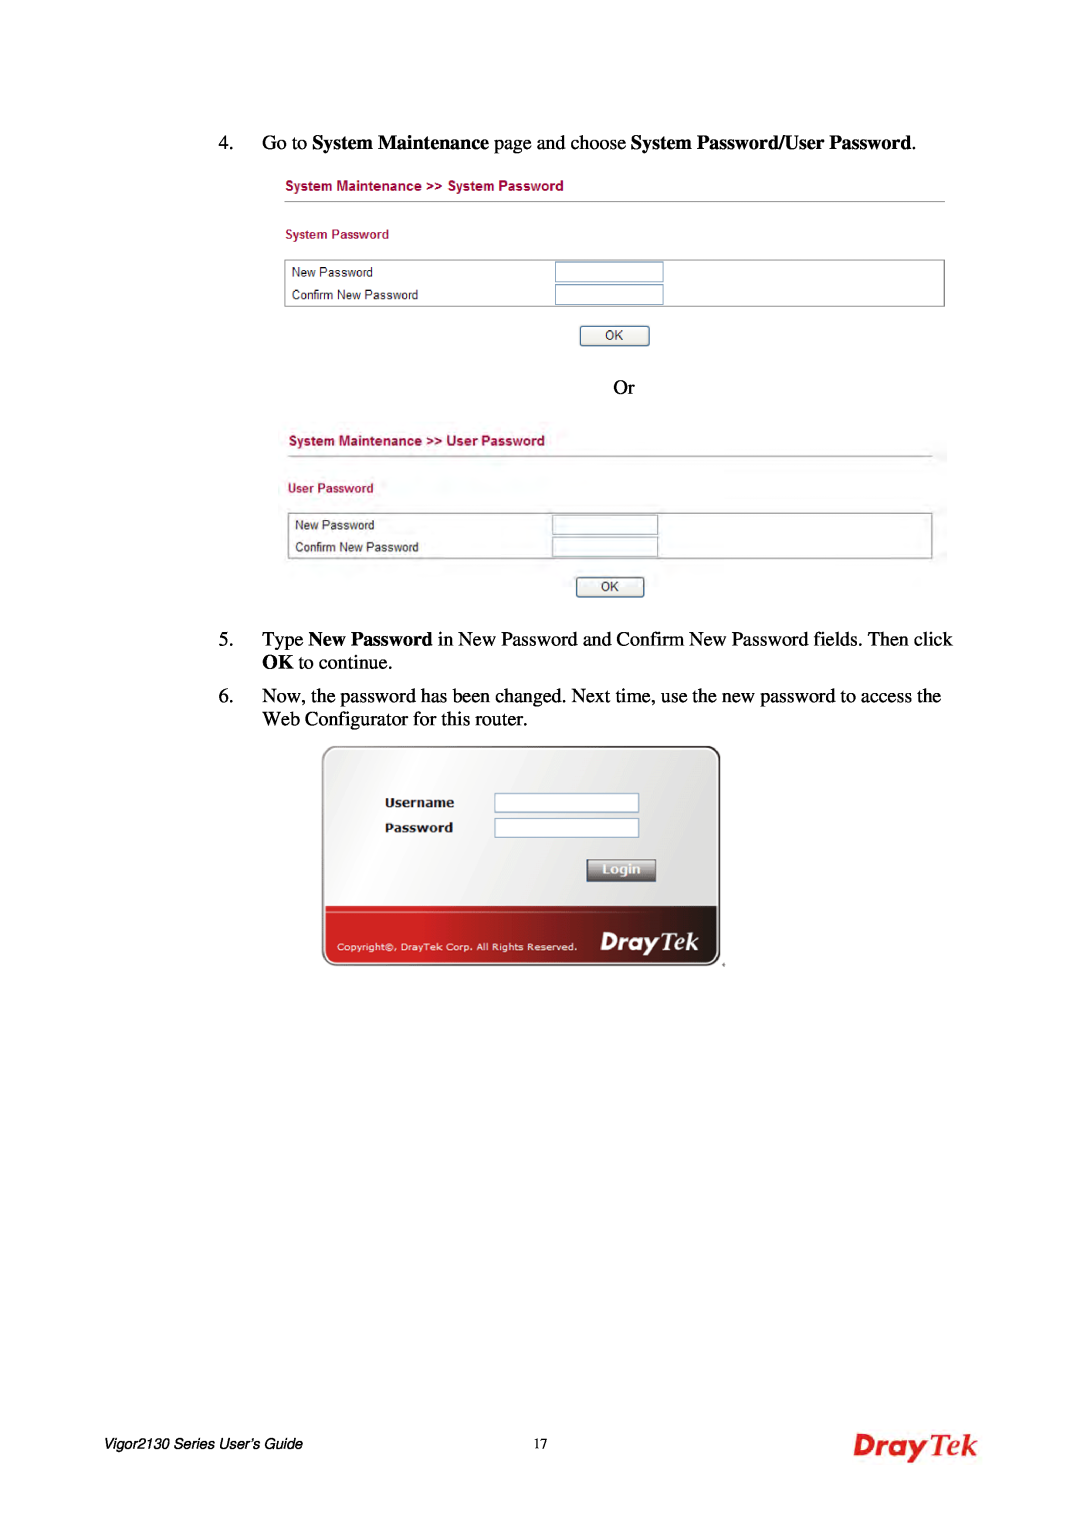 Draytek 2130 manual Type New Password in New Password and Confirm New Password fields. Then click OK to continue 